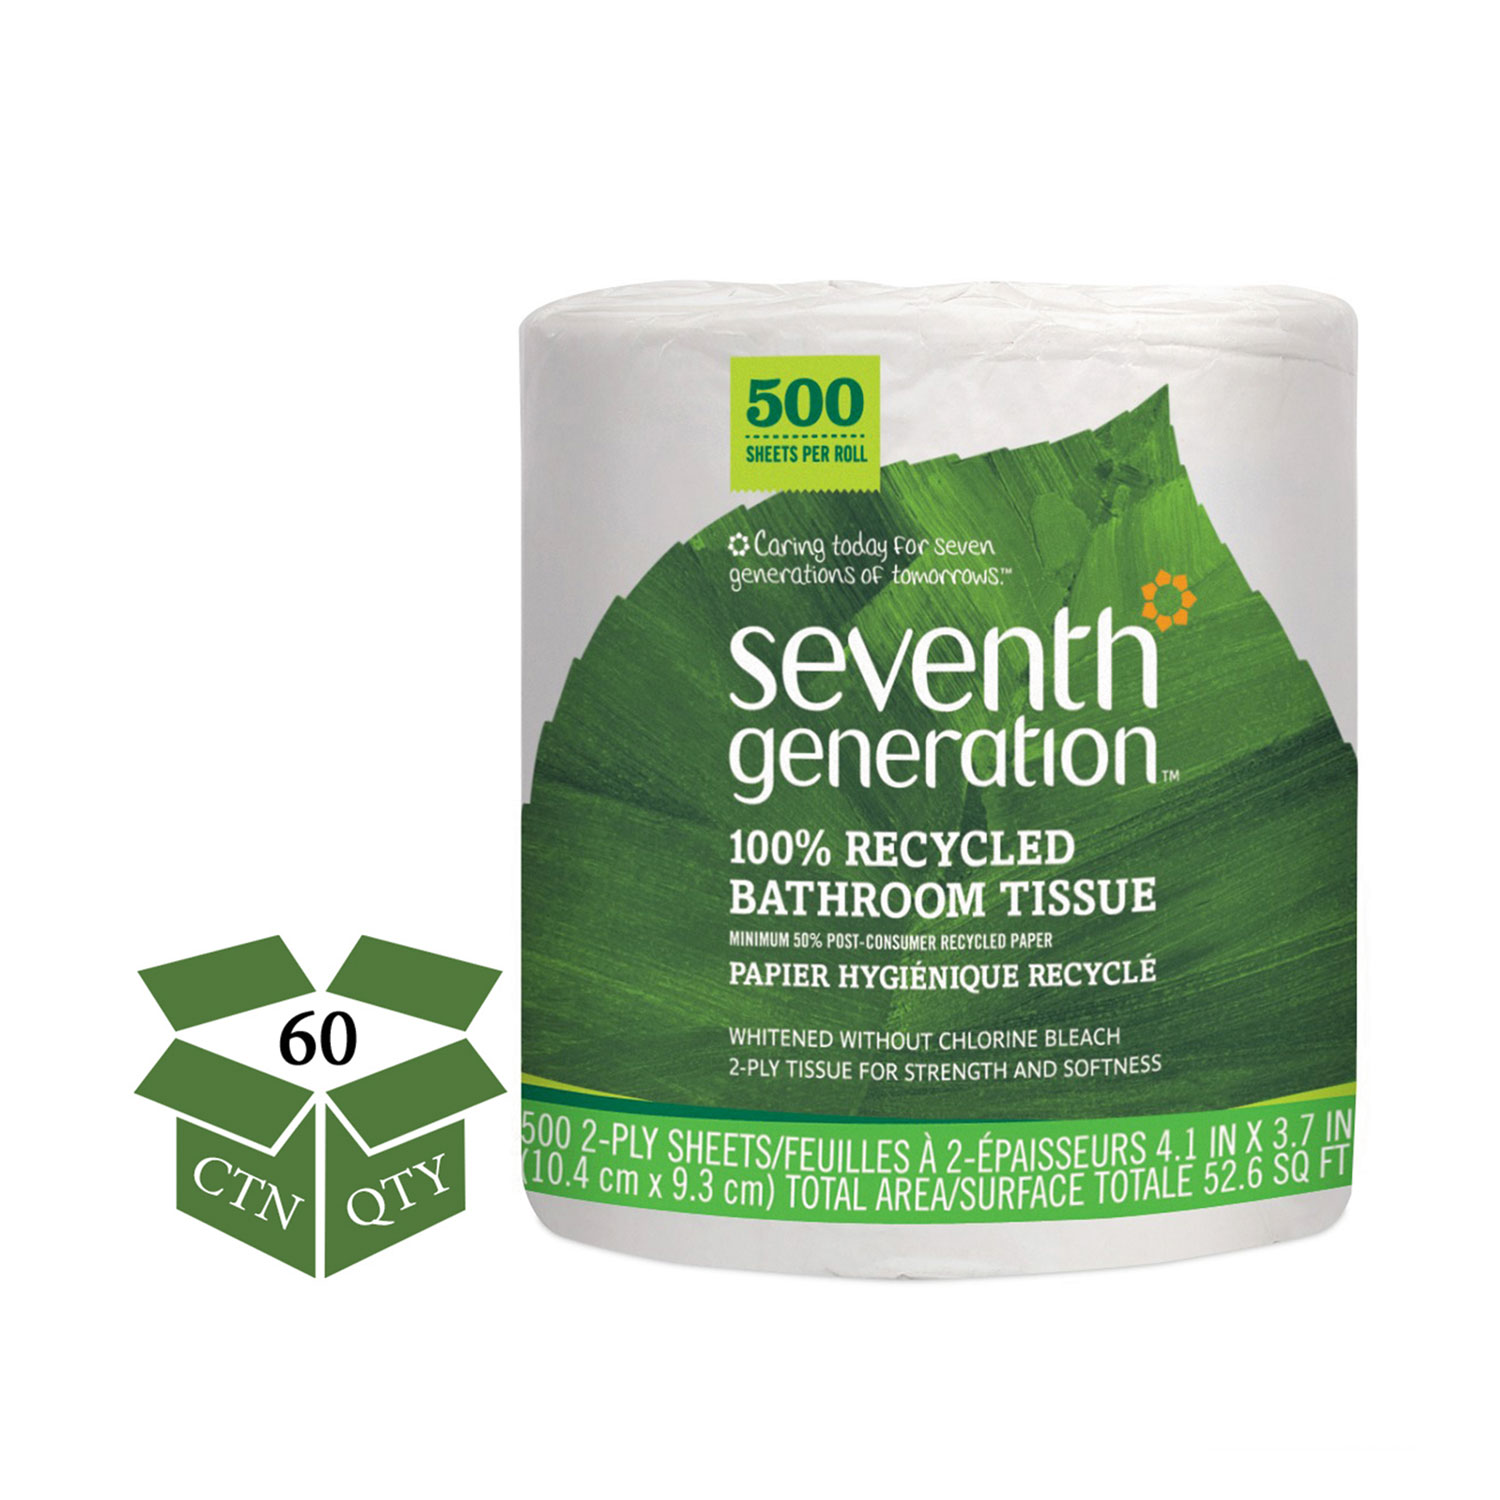  Seventh Generation 137038 100% Recycled Bathroom Tissue, Septic Safe, 2-Ply, White, 500 Sheets/Jumbo Roll, 60/Carton (SEV137038) 